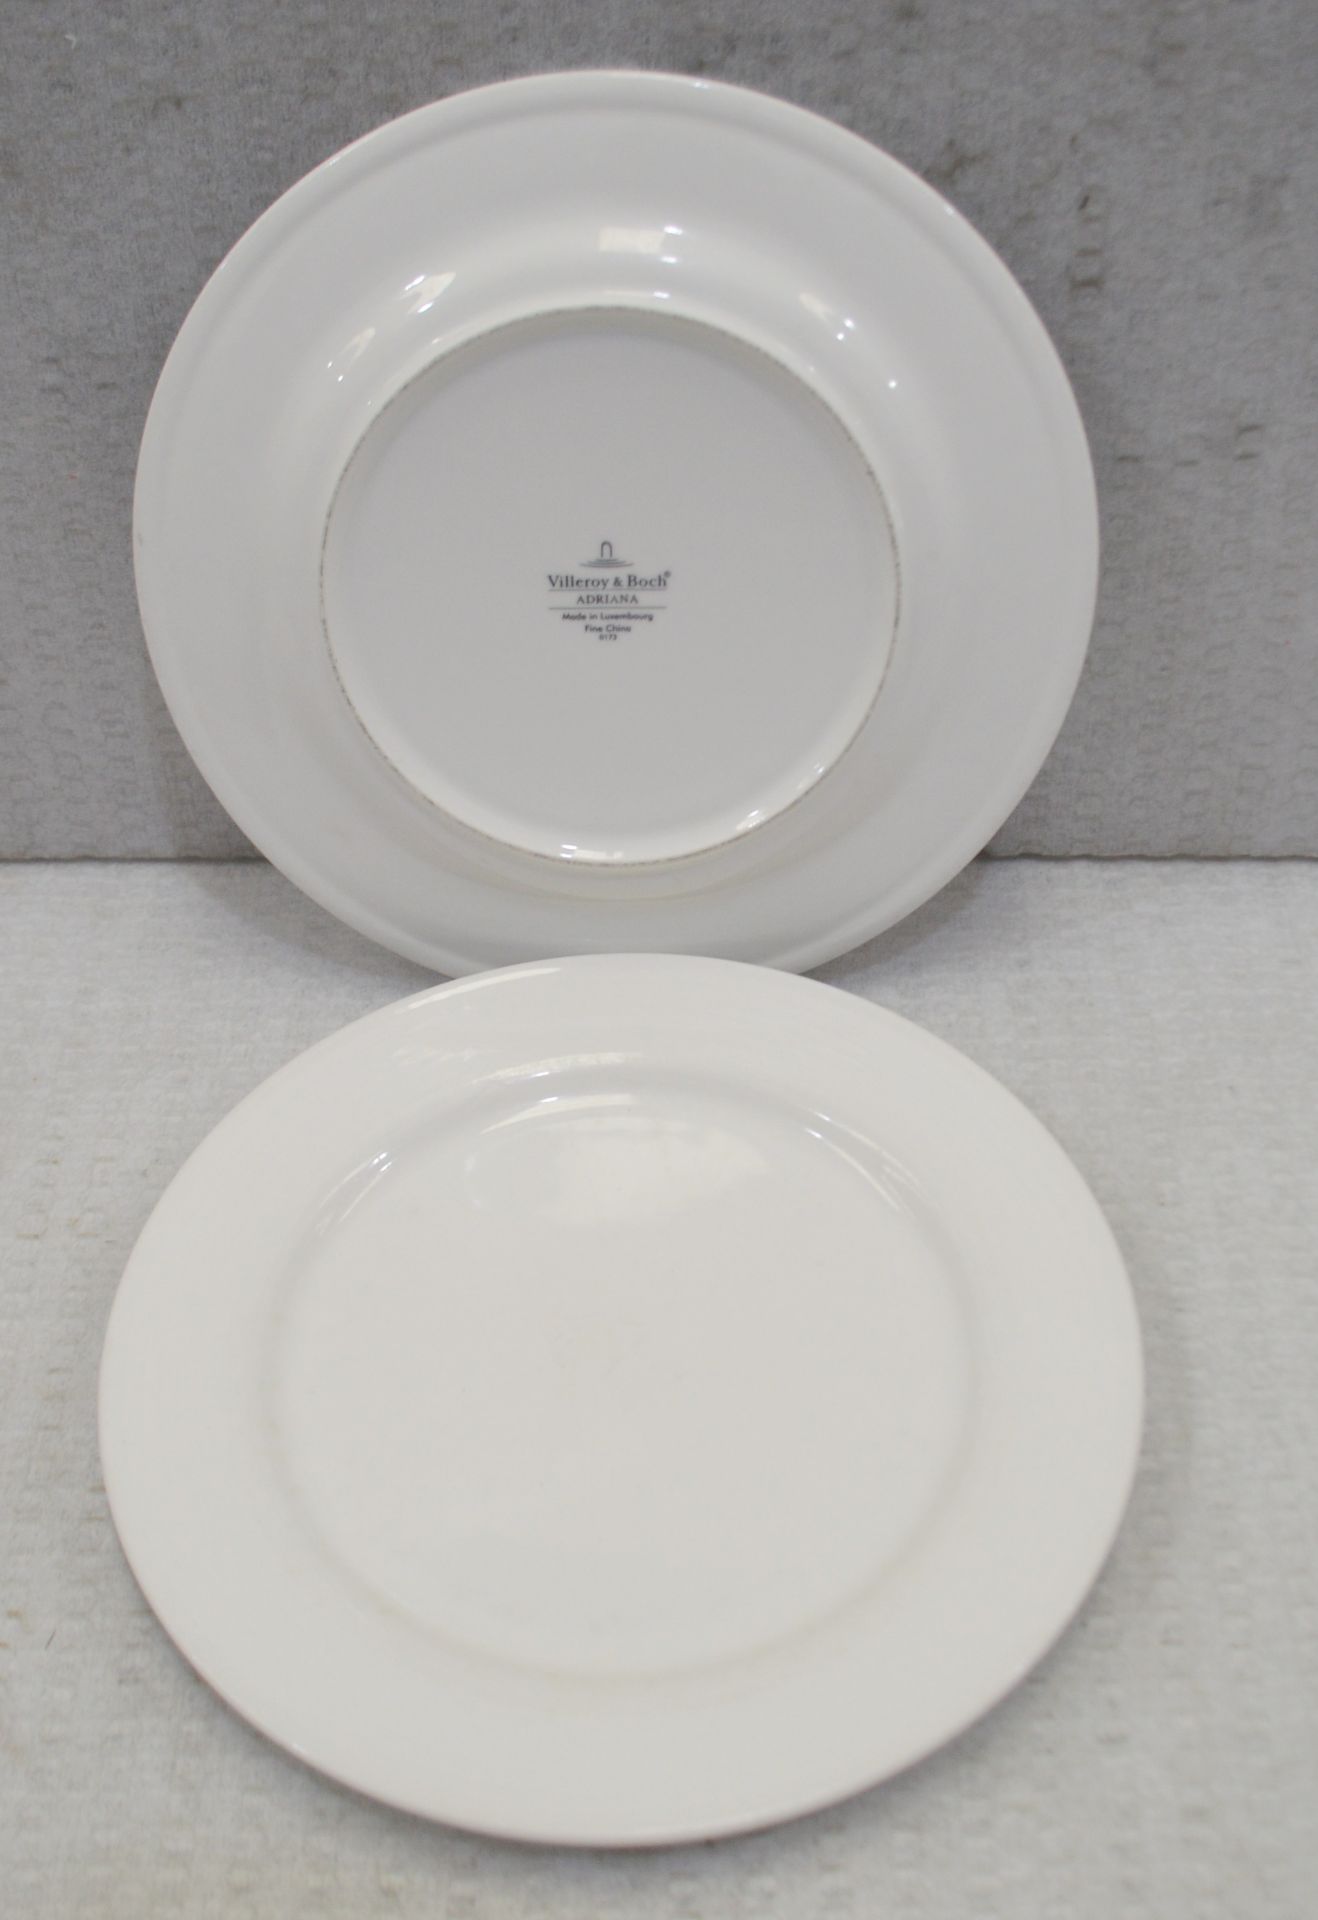 54 x Villeroy & Boch Dinner Plates - Dimensions: 27cm – Recently Removed From a Commercial - Image 3 of 3